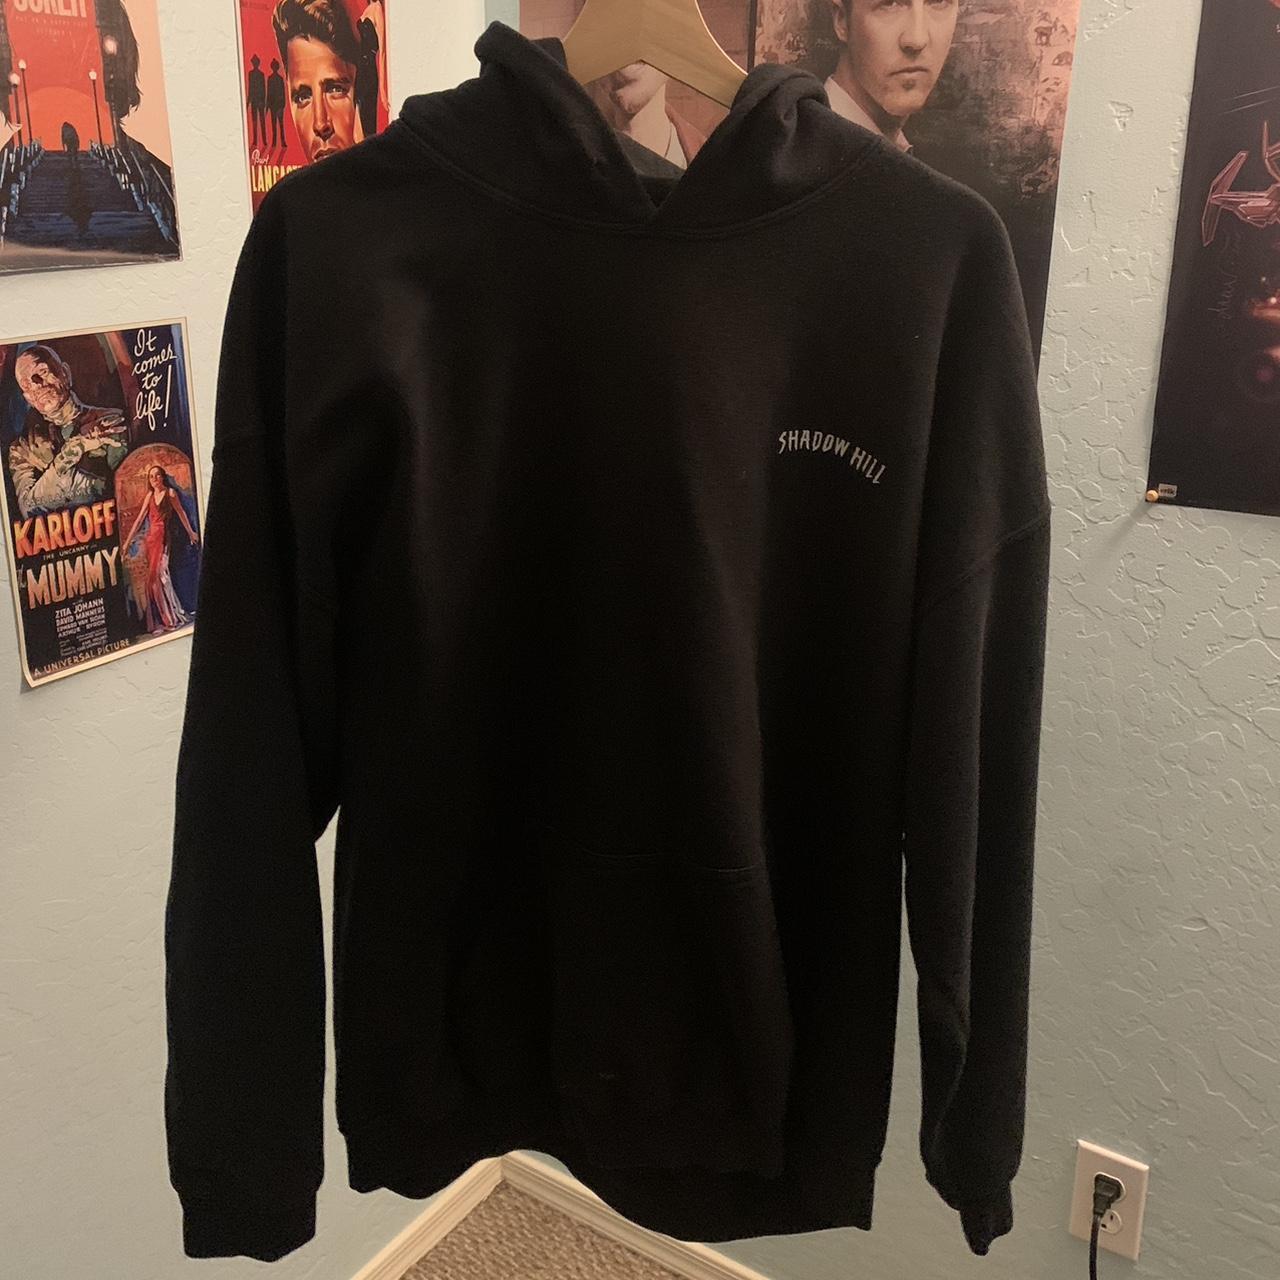 Shadow Hill Hoodie -large -no damage -free shipping - Depop